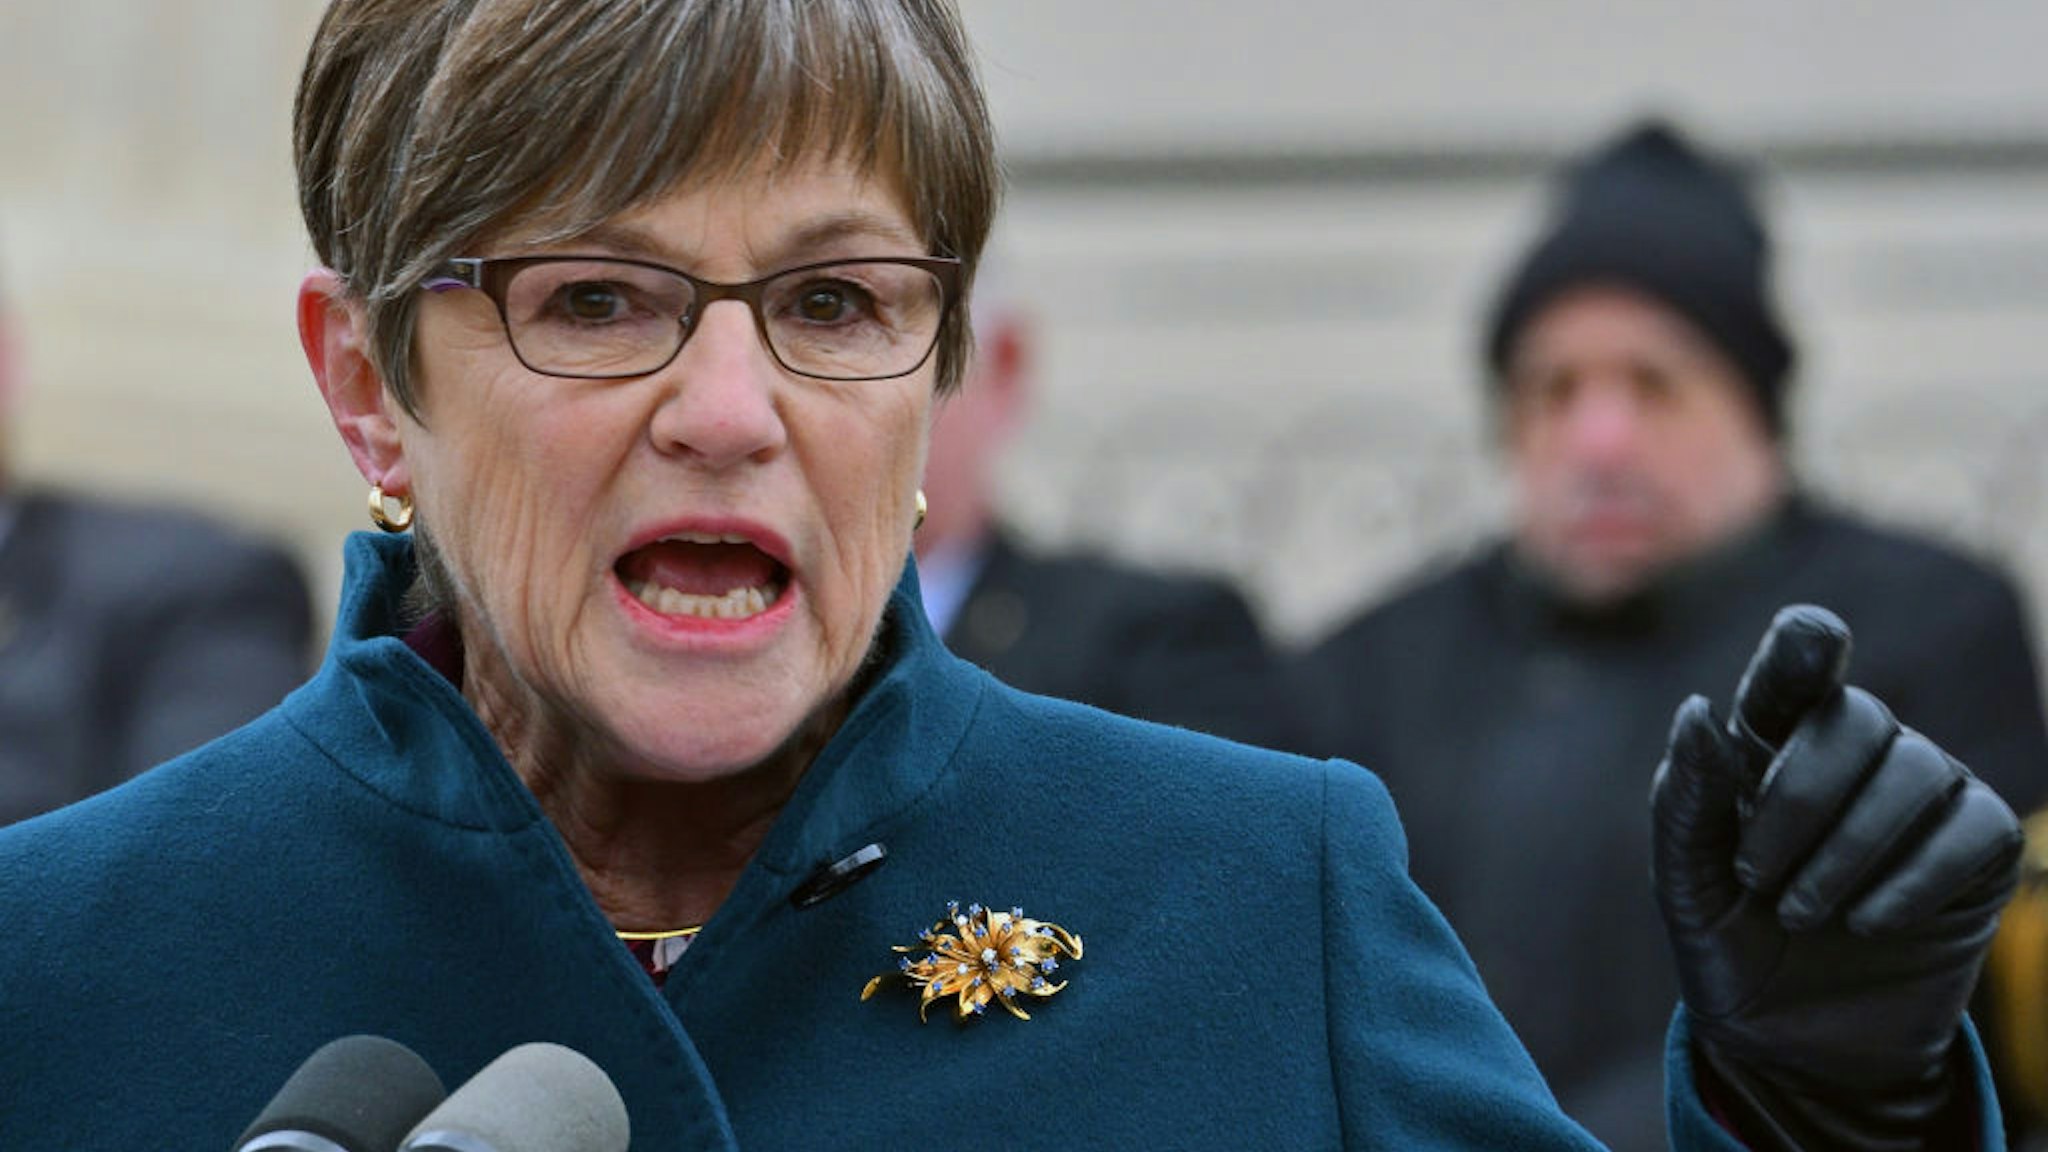 Kansas Governor Laura Kelly delivers her inaugural speech from the front steps of the Kansas State Capitol building, Topeka, Kansas January 14, 2019